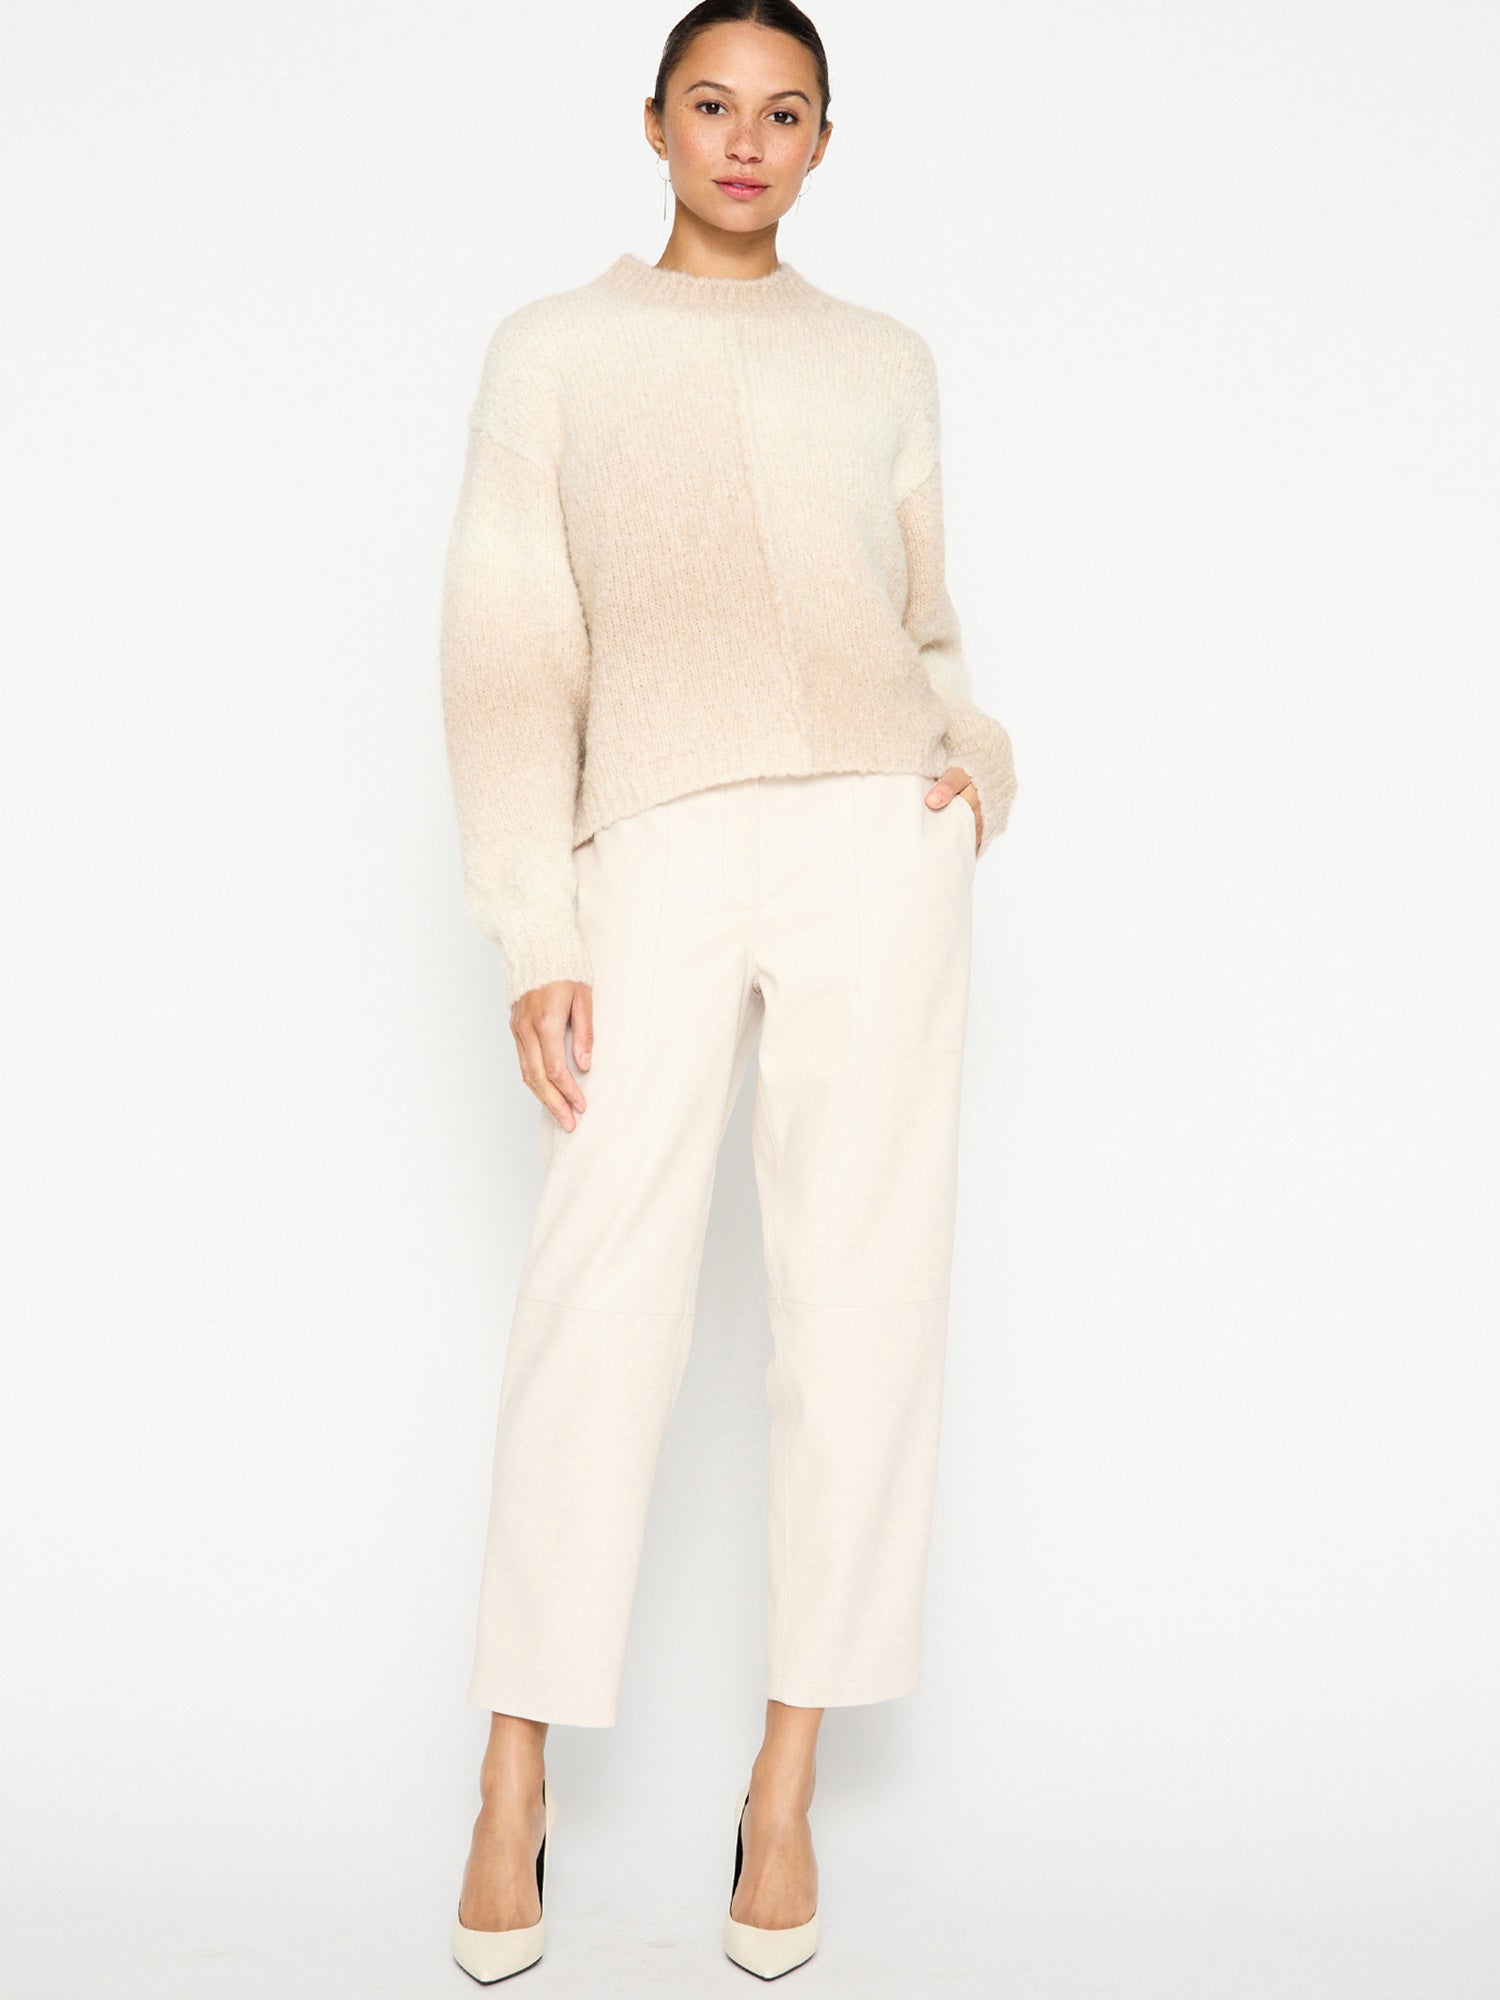 Ro ivory light pink ombre sweater full view 2